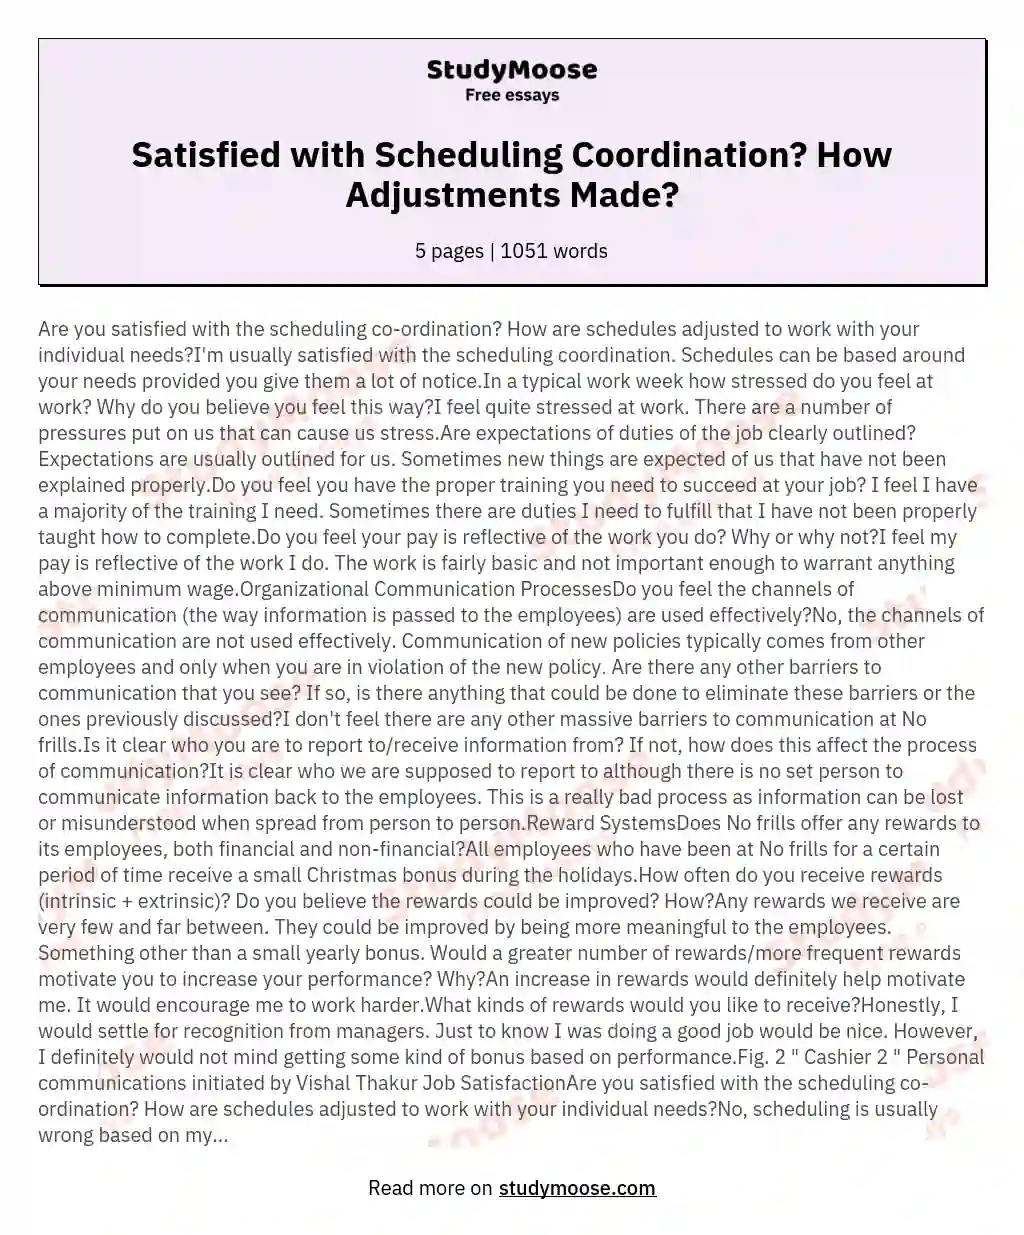 Are you satisfied with the scheduling coordination? How are schedules adjusted to